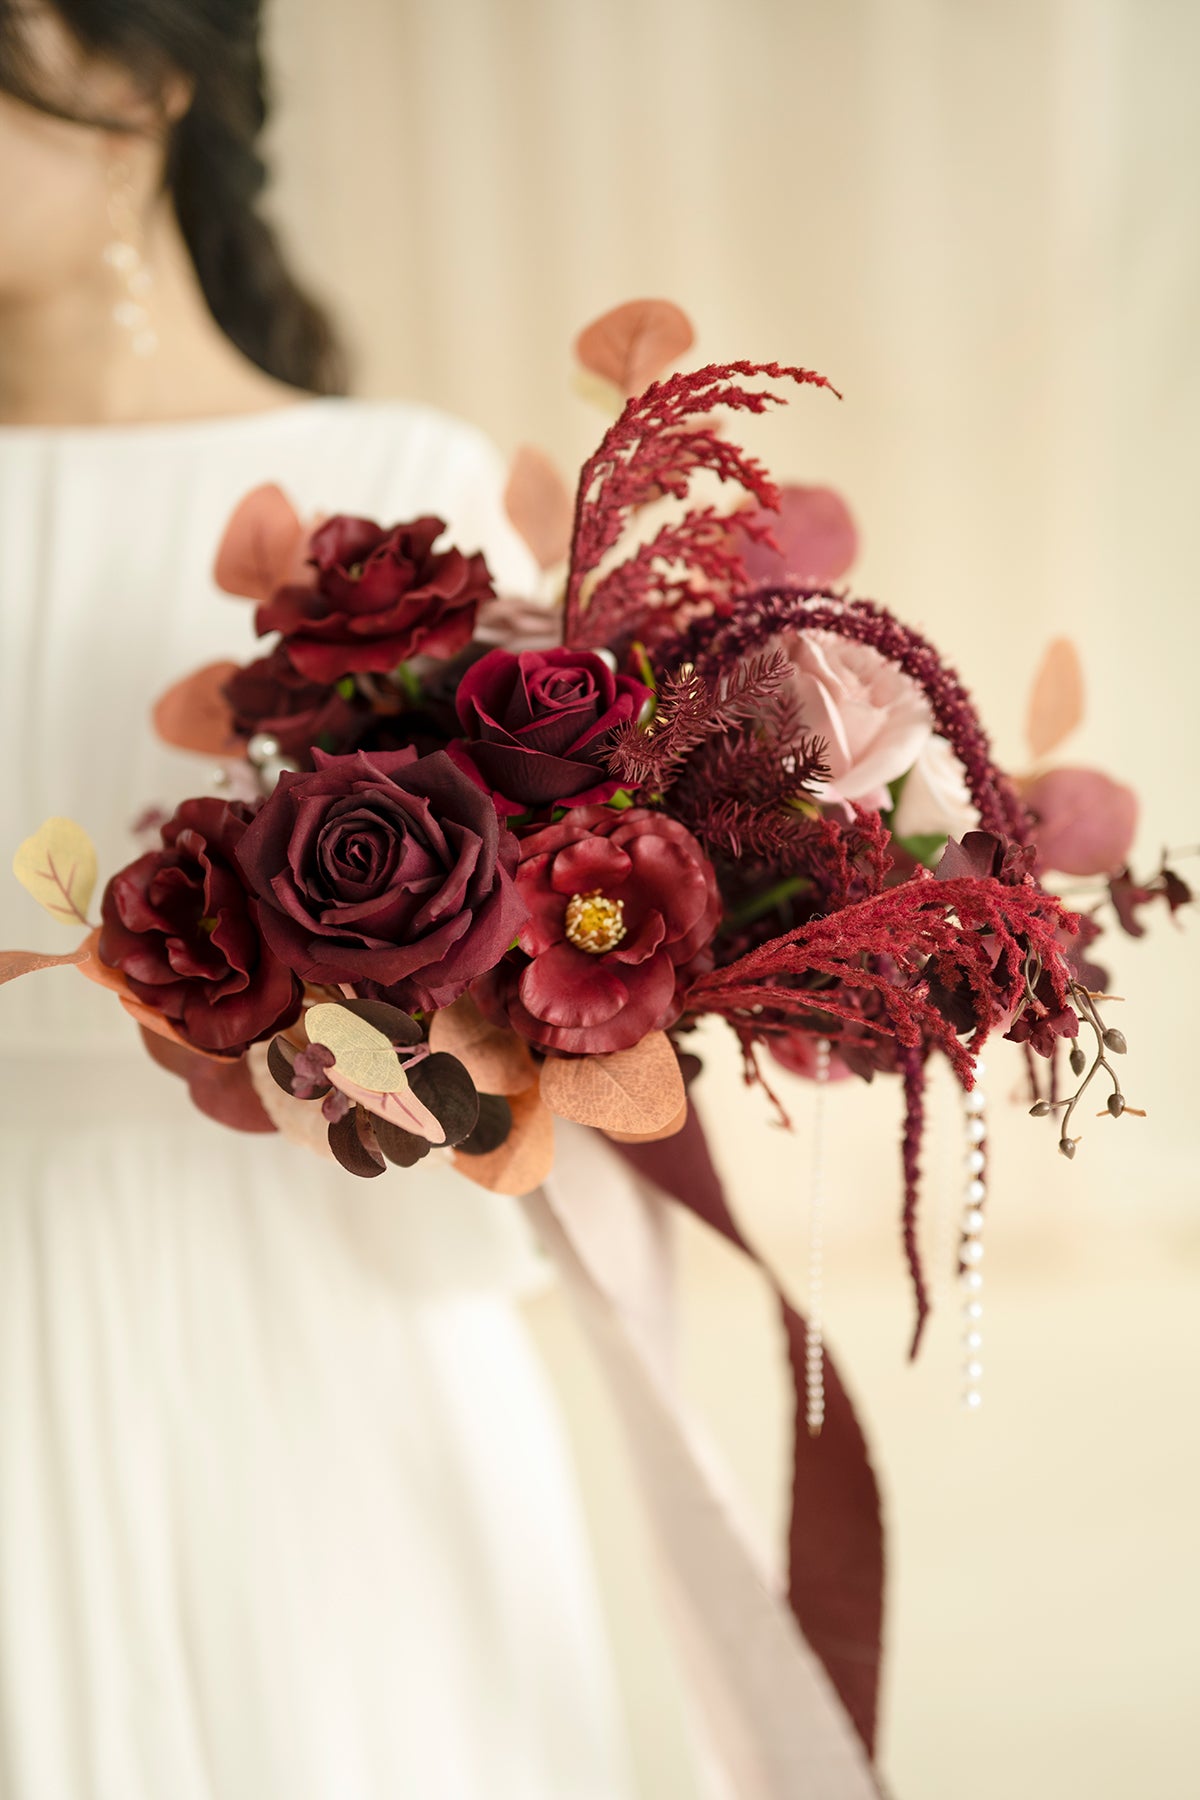 Small Free-Form Bridal Bouquet in Burgundy & Dusty Rose